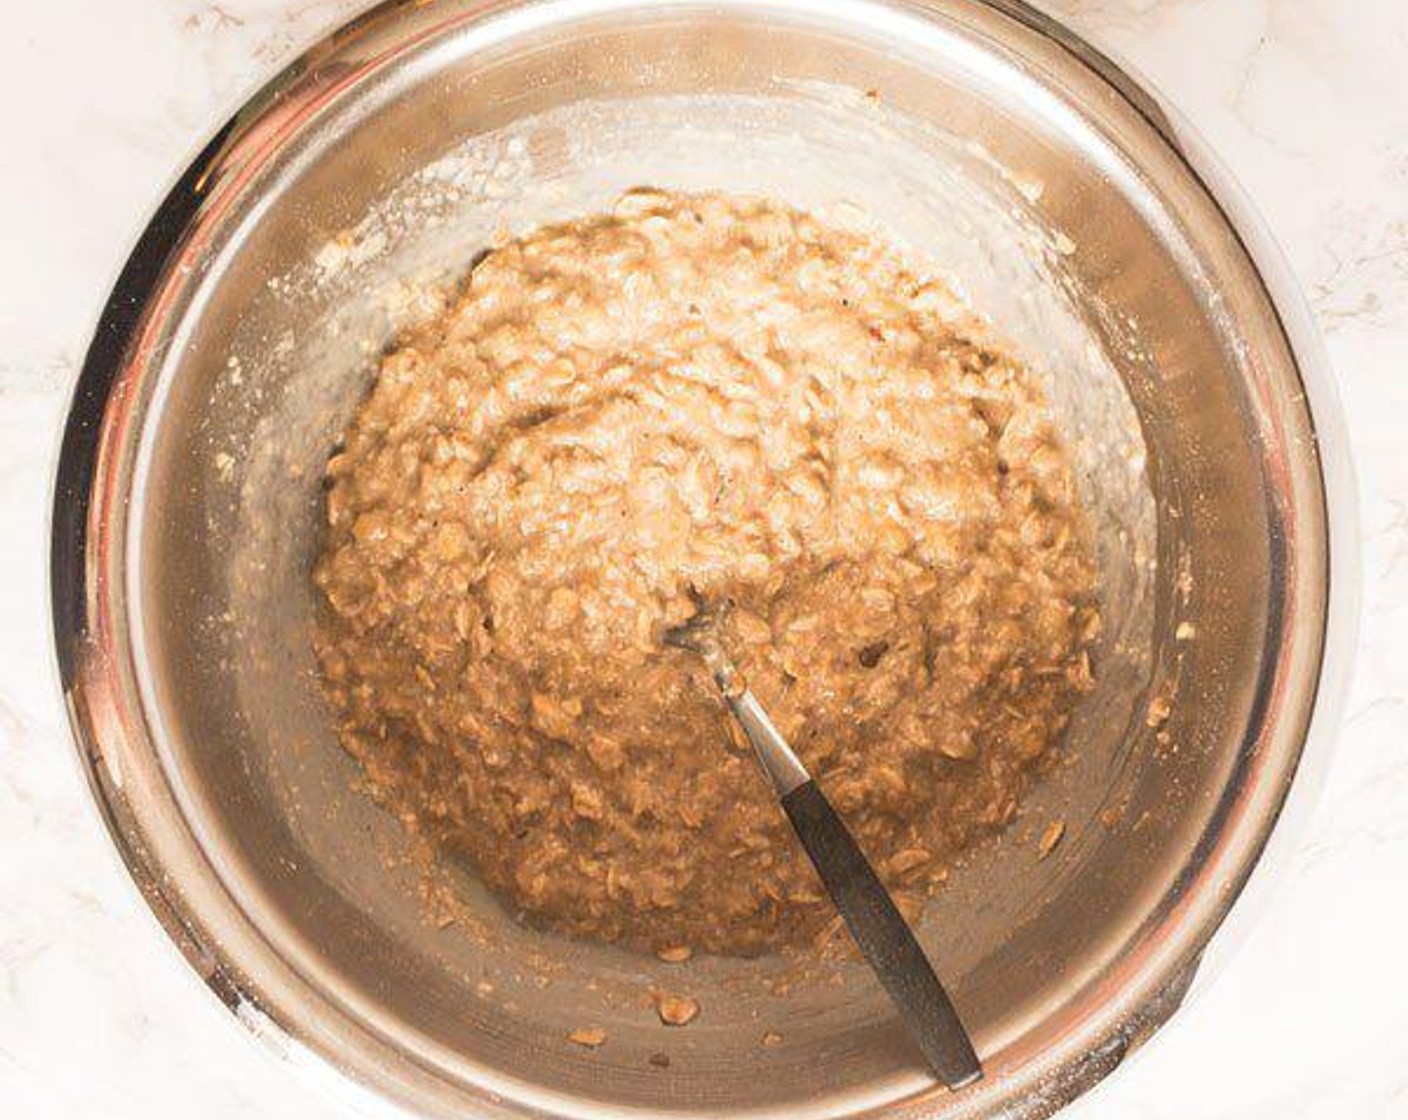 step 6 Add Oats (1/4 cup), Oat Flour (1/2 cup), Almond Milk (1/2 cup), Dark Chocolate Chips (1/4 cup), Fine Sea Salt (1/8 tsp), and Vanilla Extract (1/2 tsp).